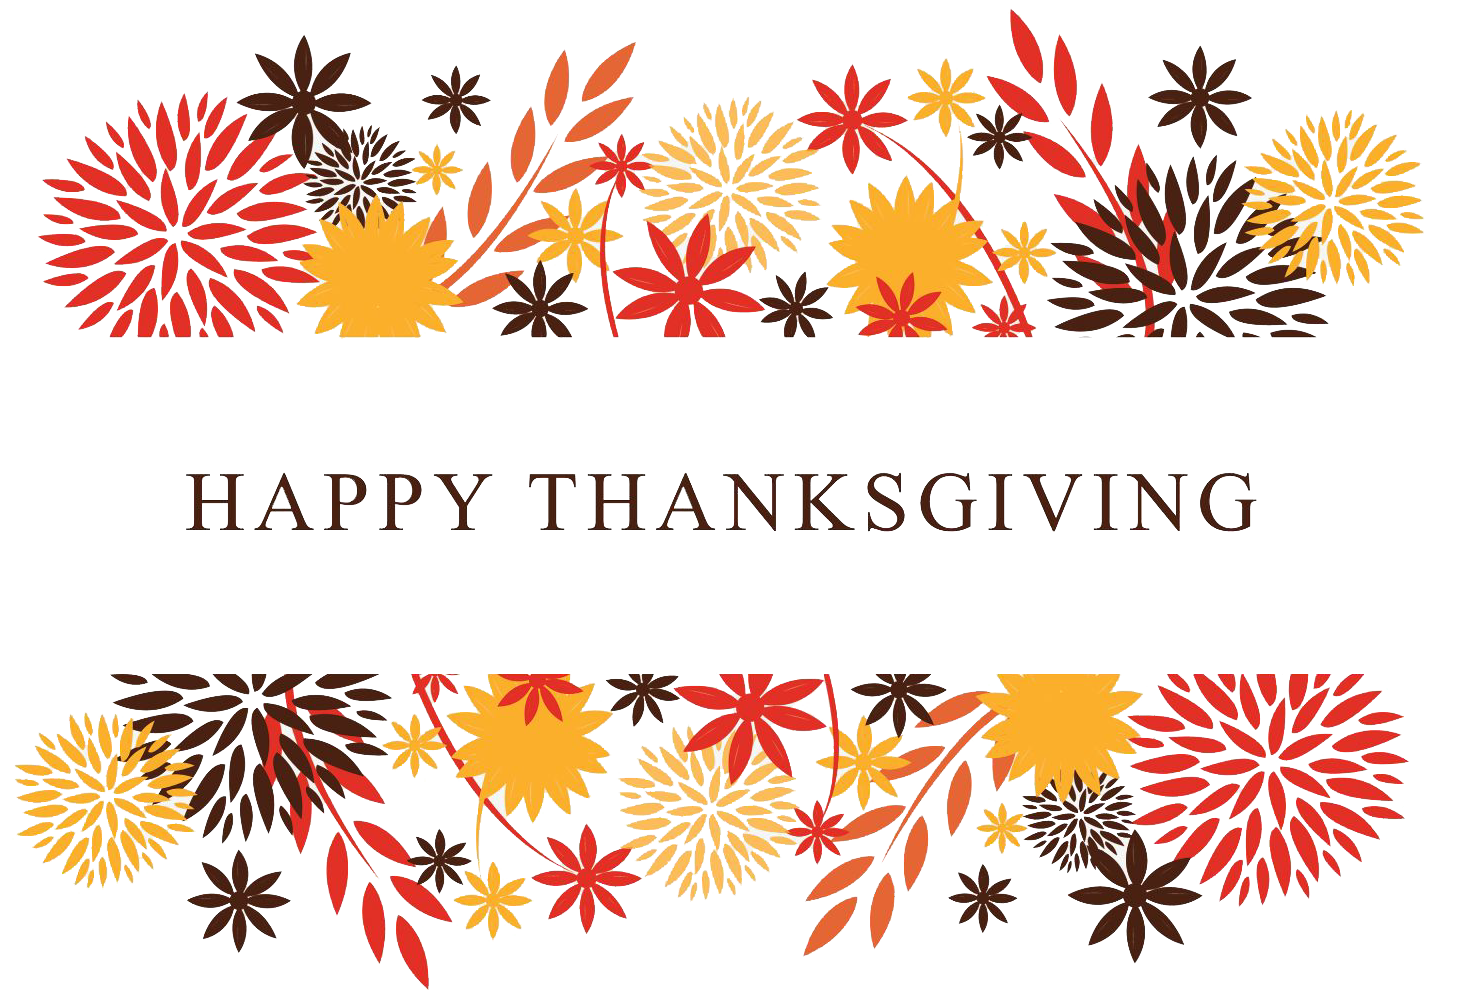 Happy Thanksgiving Download Free PNG